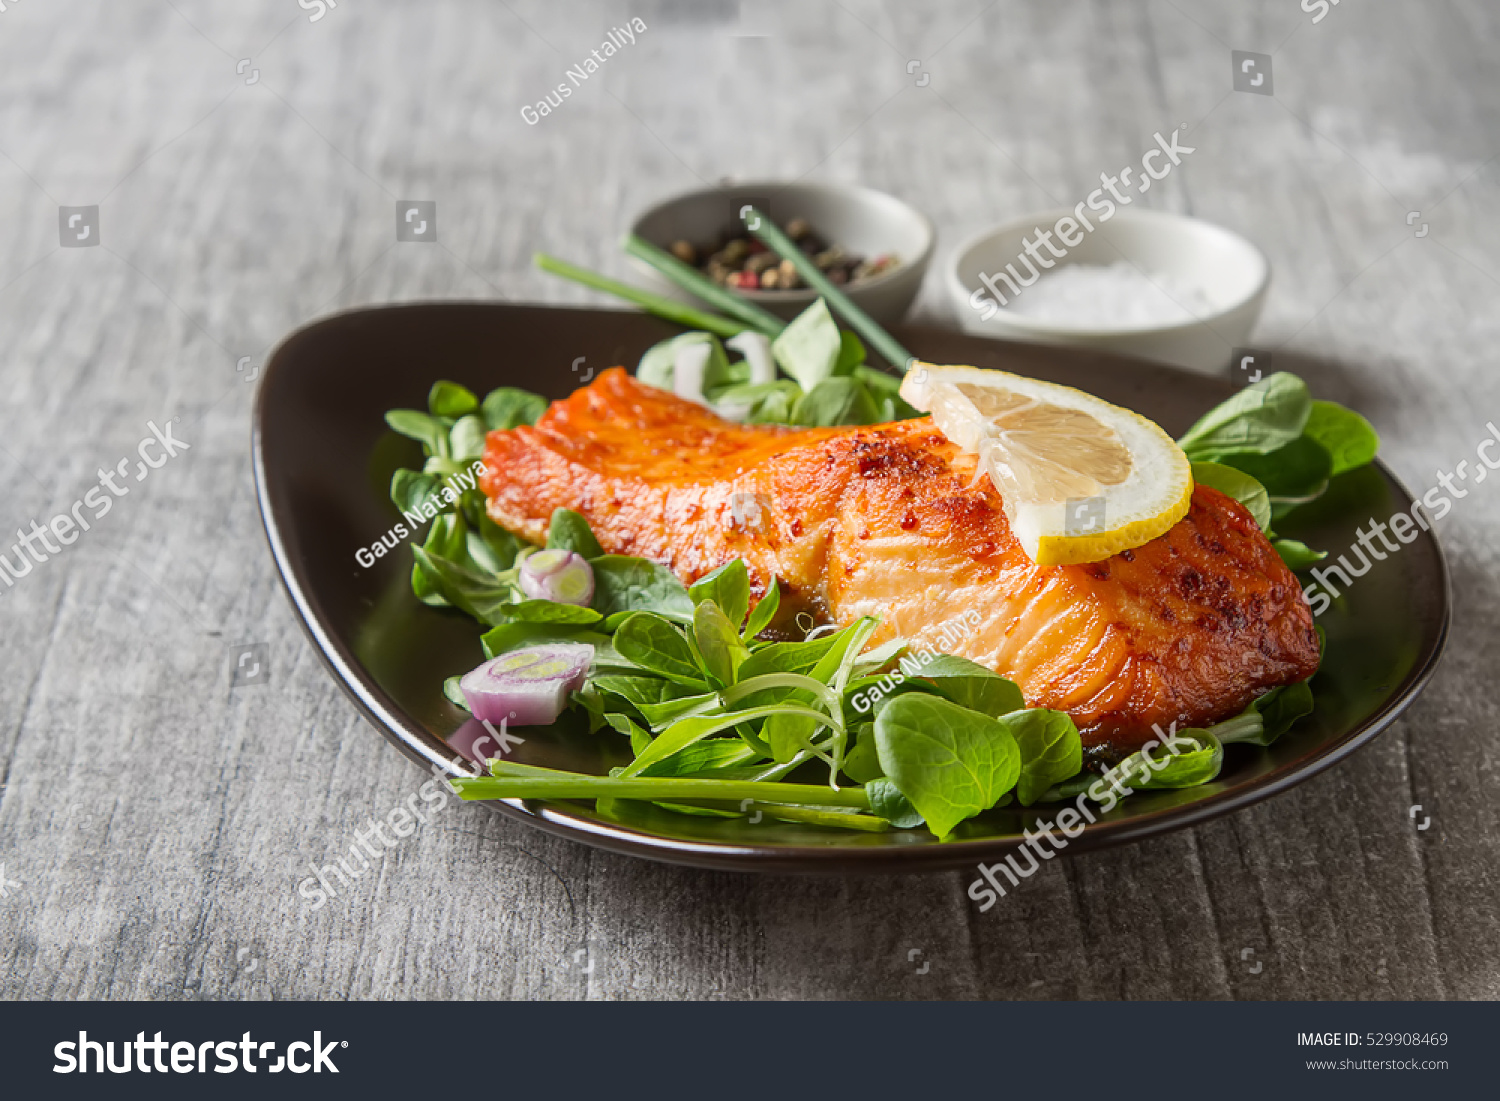 One piece of baked salmon grilled pepper lemon and salt on a brown plate with lettuce leaves. wood background #529908469